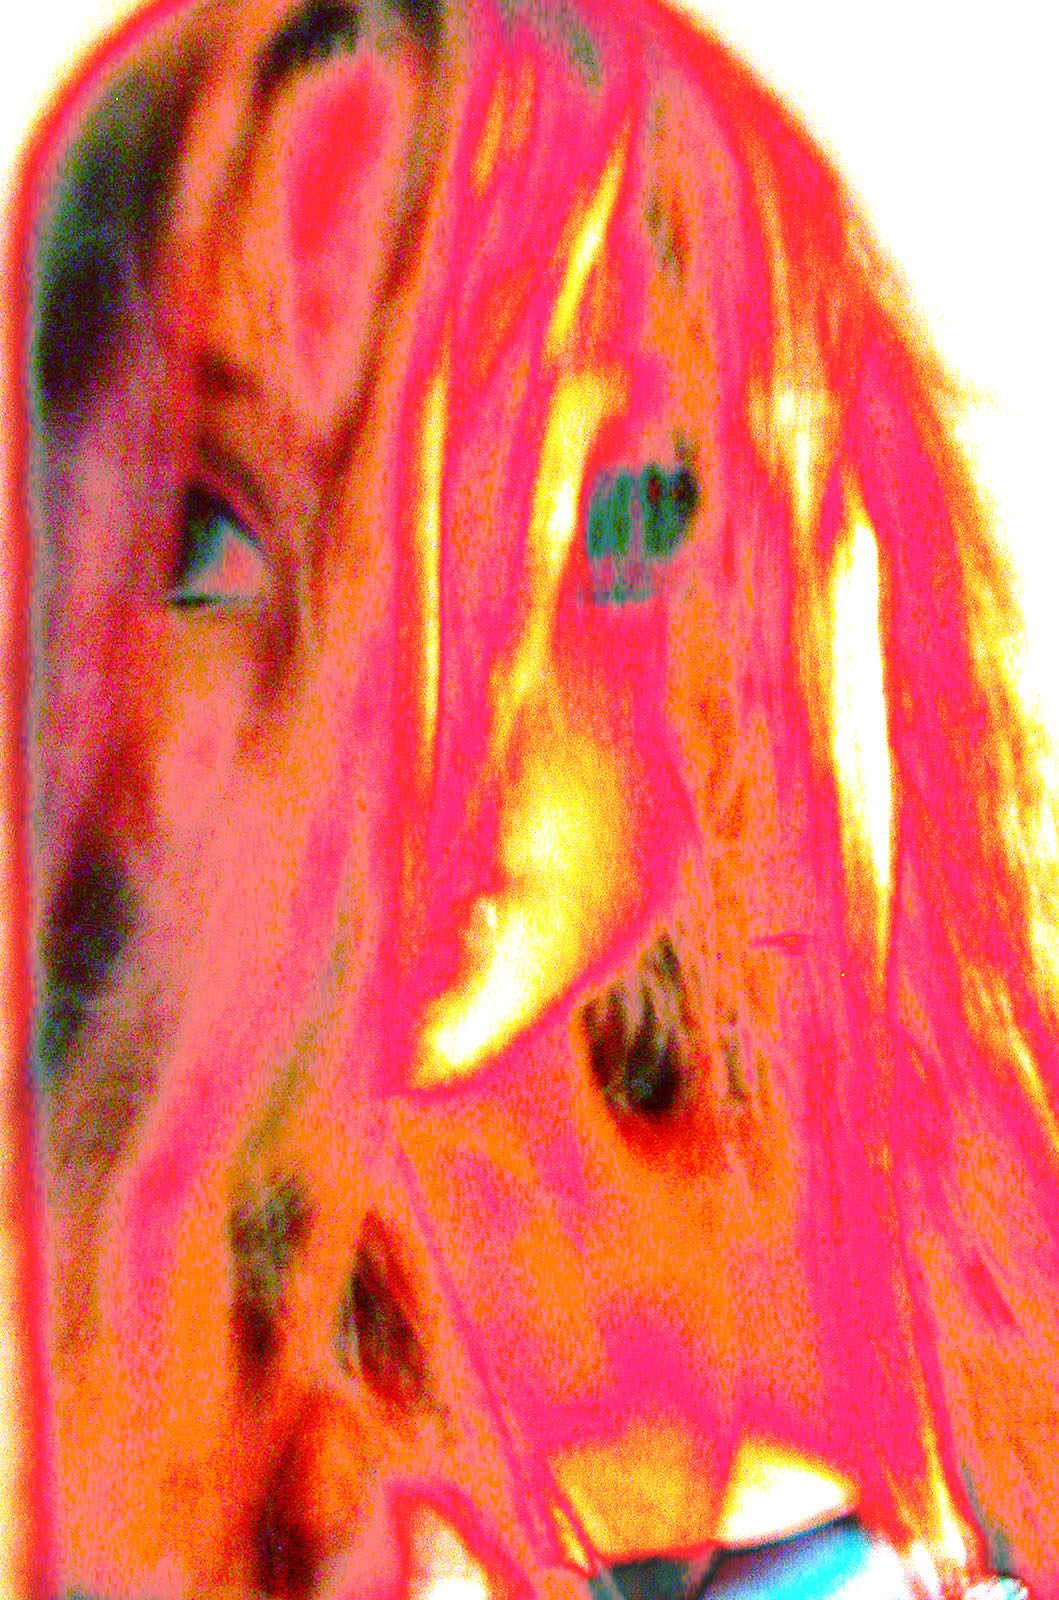 the image is distorted to reveal a long haired person